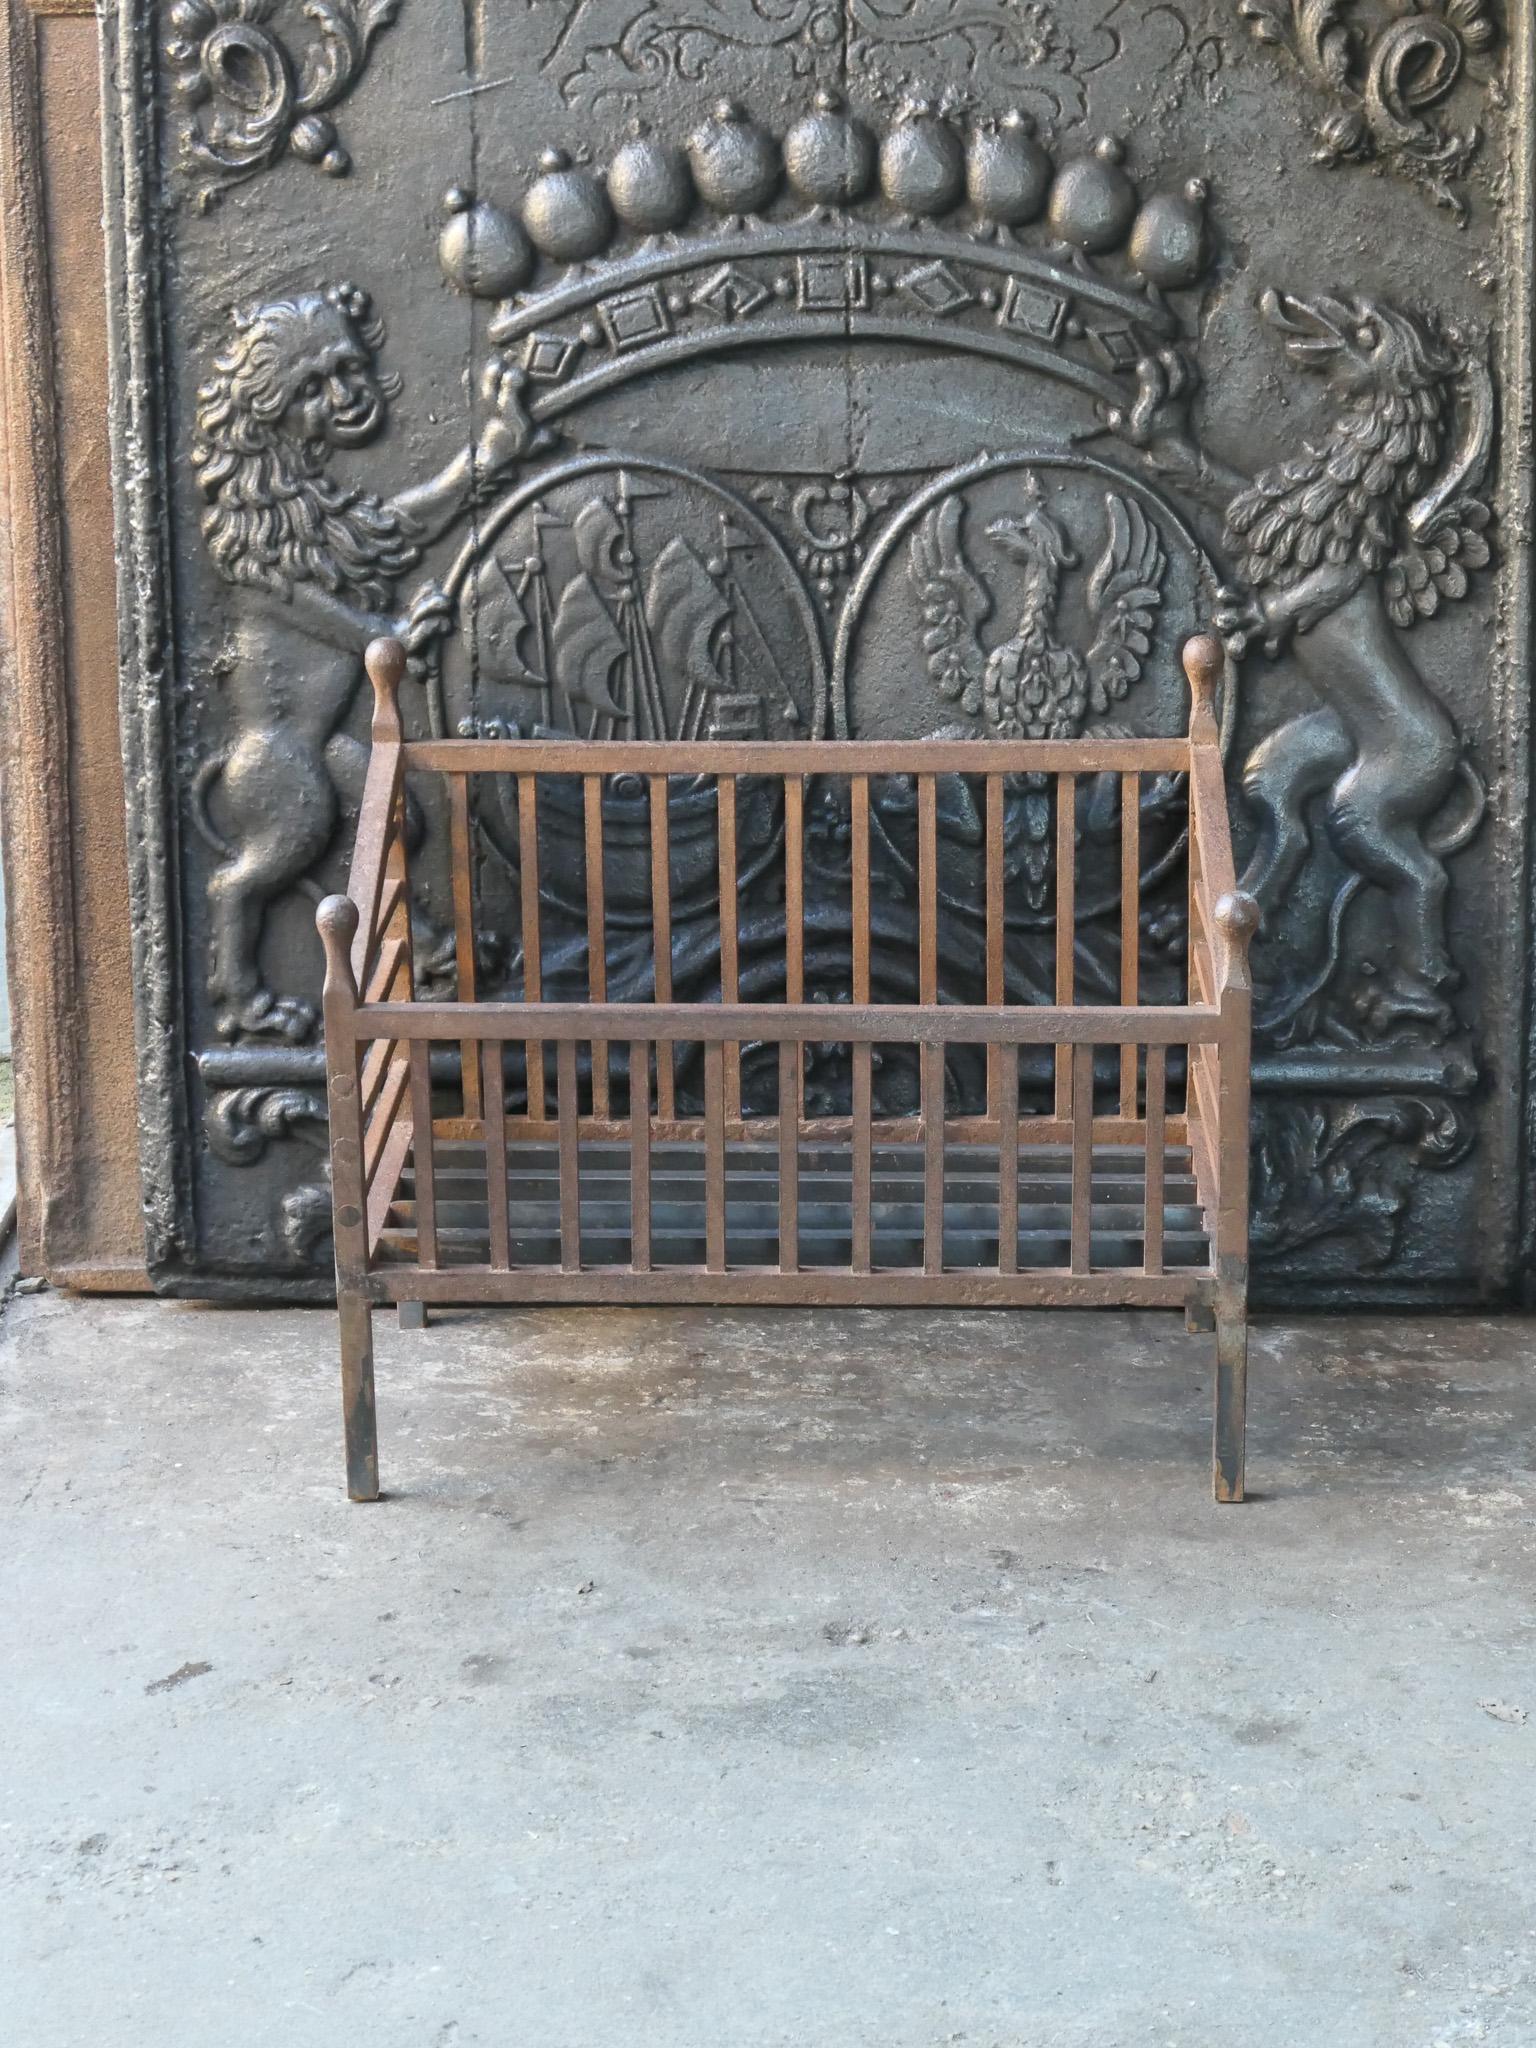 Late 19th or early 20th century French Napoleon III style fireplace grate. It is made of wrought iron. The basket is in a good condition and is fully functional.
